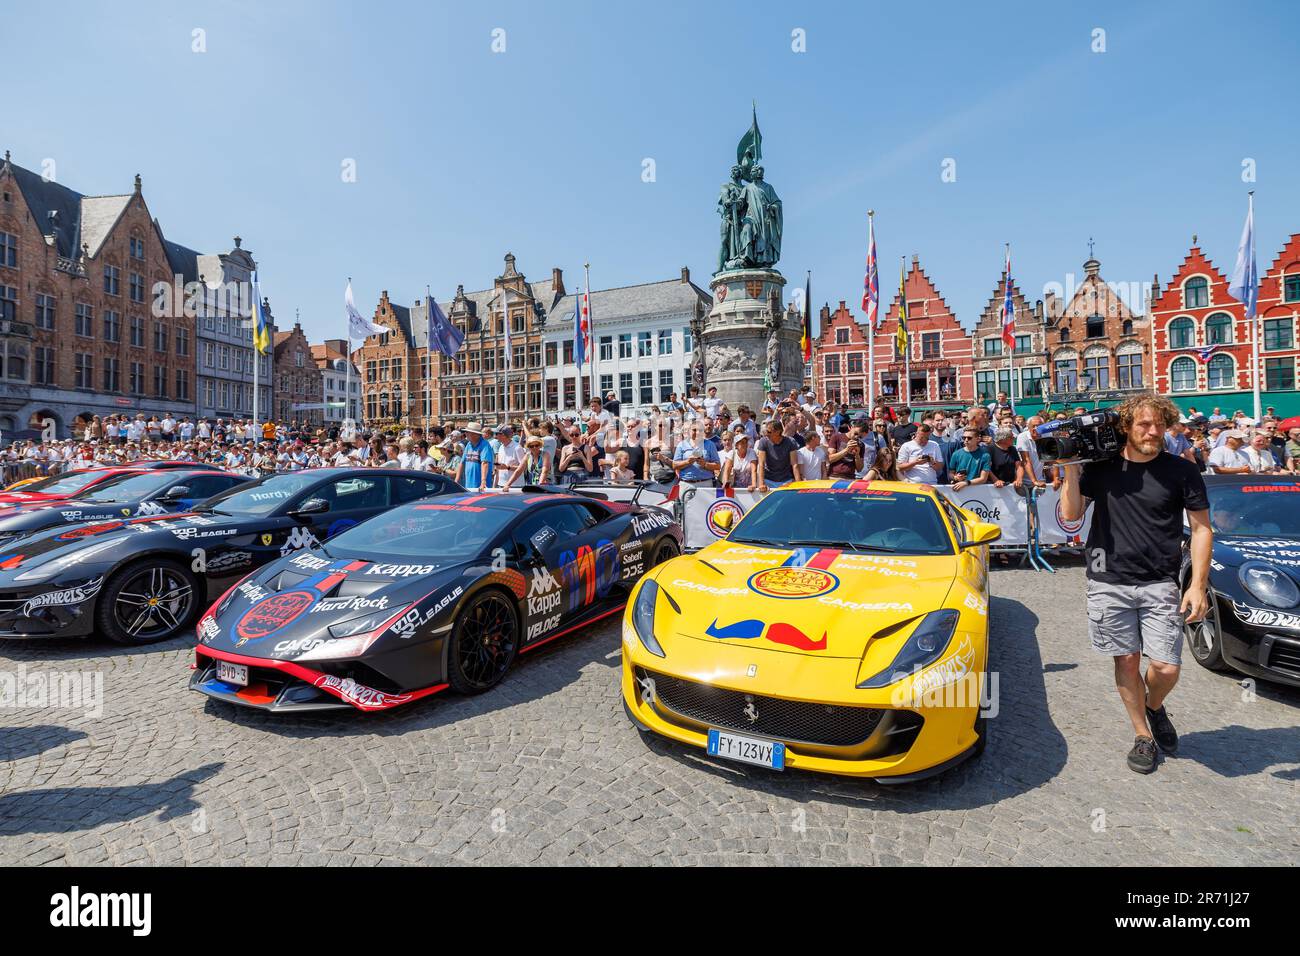 Brugge, Belgium. 12th June, 2023. Race cars pictured during the Gumball 3000 annual international celebrity motor rally passing by Brugge, Monday 12 June 2023. The Gumball rally takes place on public roads. The name comes from the 1976 movie The Gumball Rally. It was established in 1999 by Maximillion Cooper, with his vision to combine cars, music, fashion and entertainment. BELGA PHOTO KURT DESPLENTER Credit: Belga News Agency/Alamy Live News Stock Photo